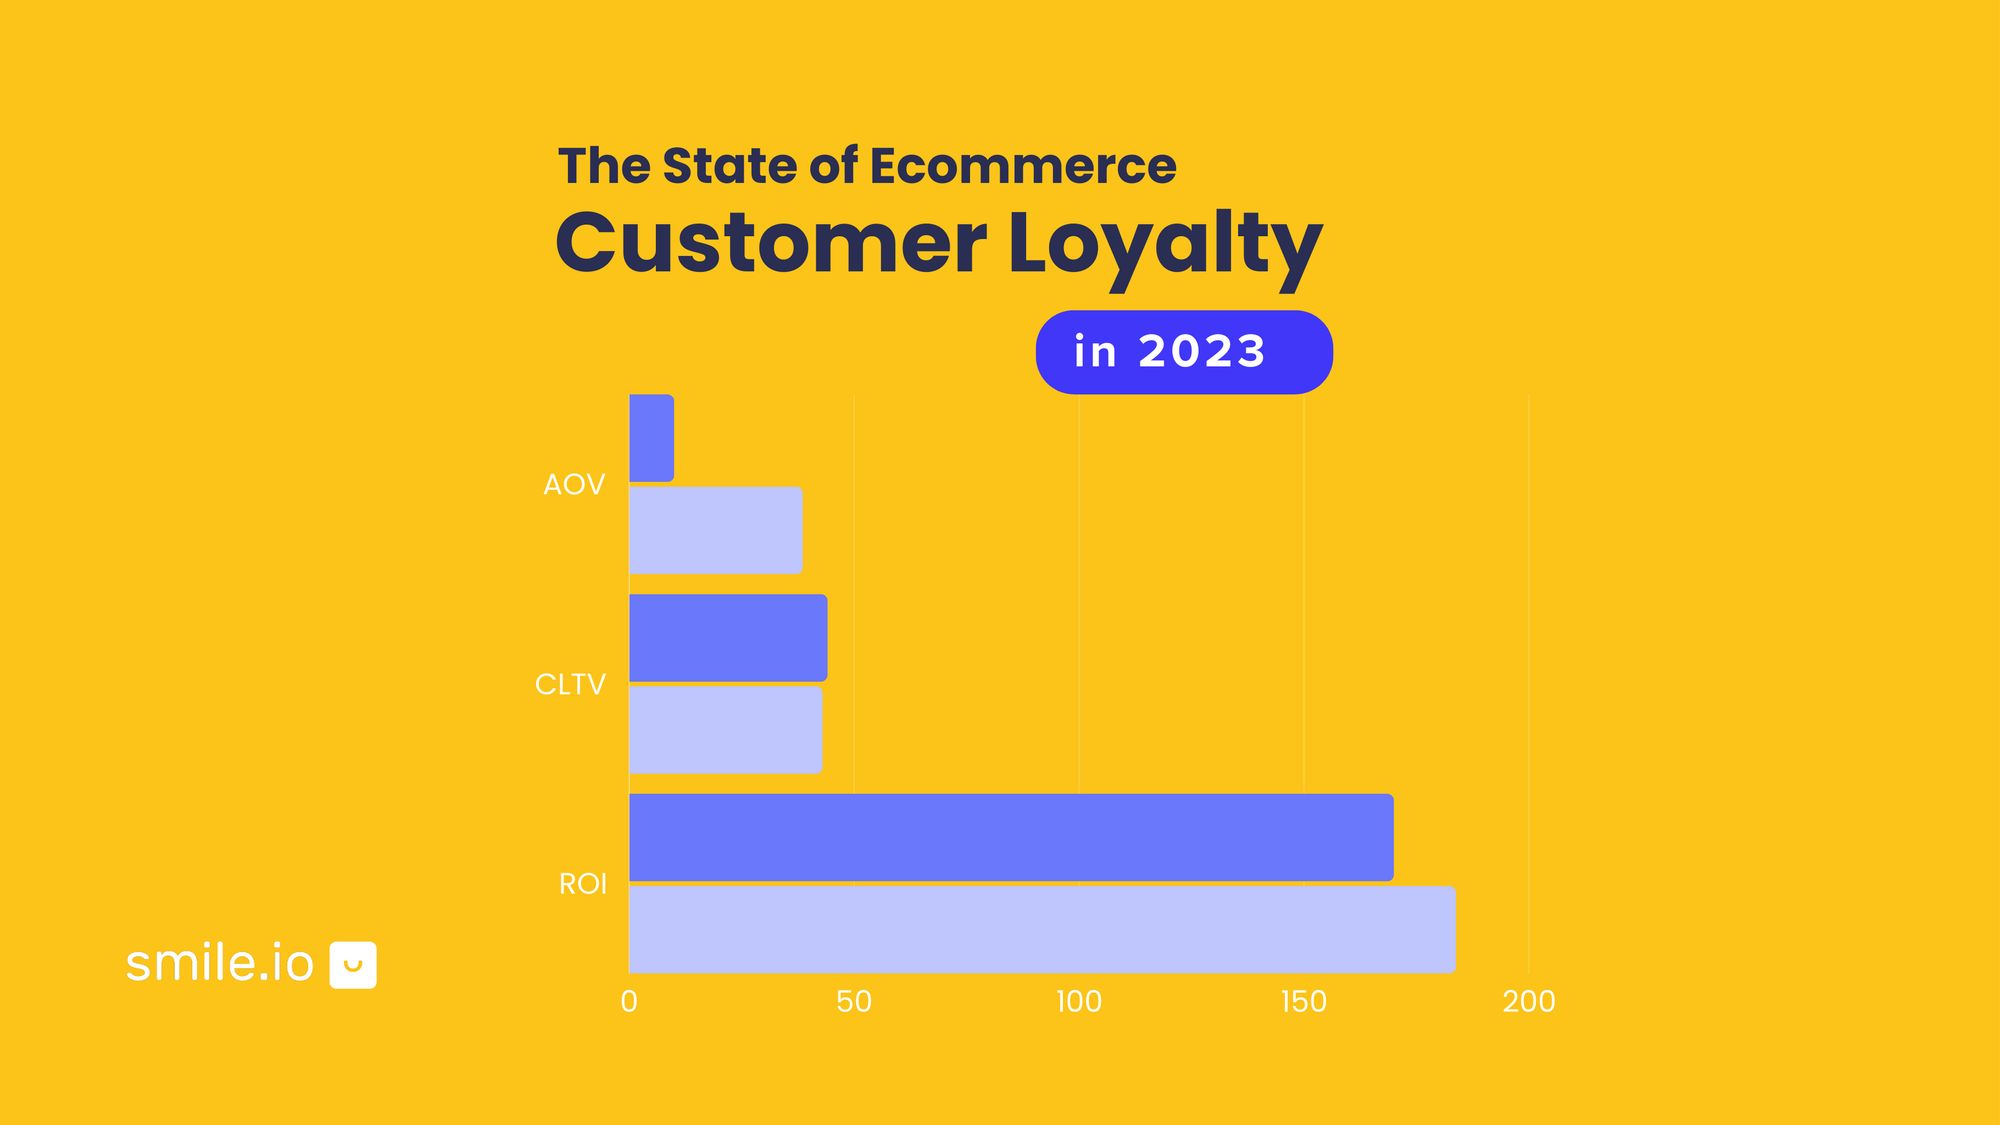 The State of Ecommerce Customer Loyalty in 2023